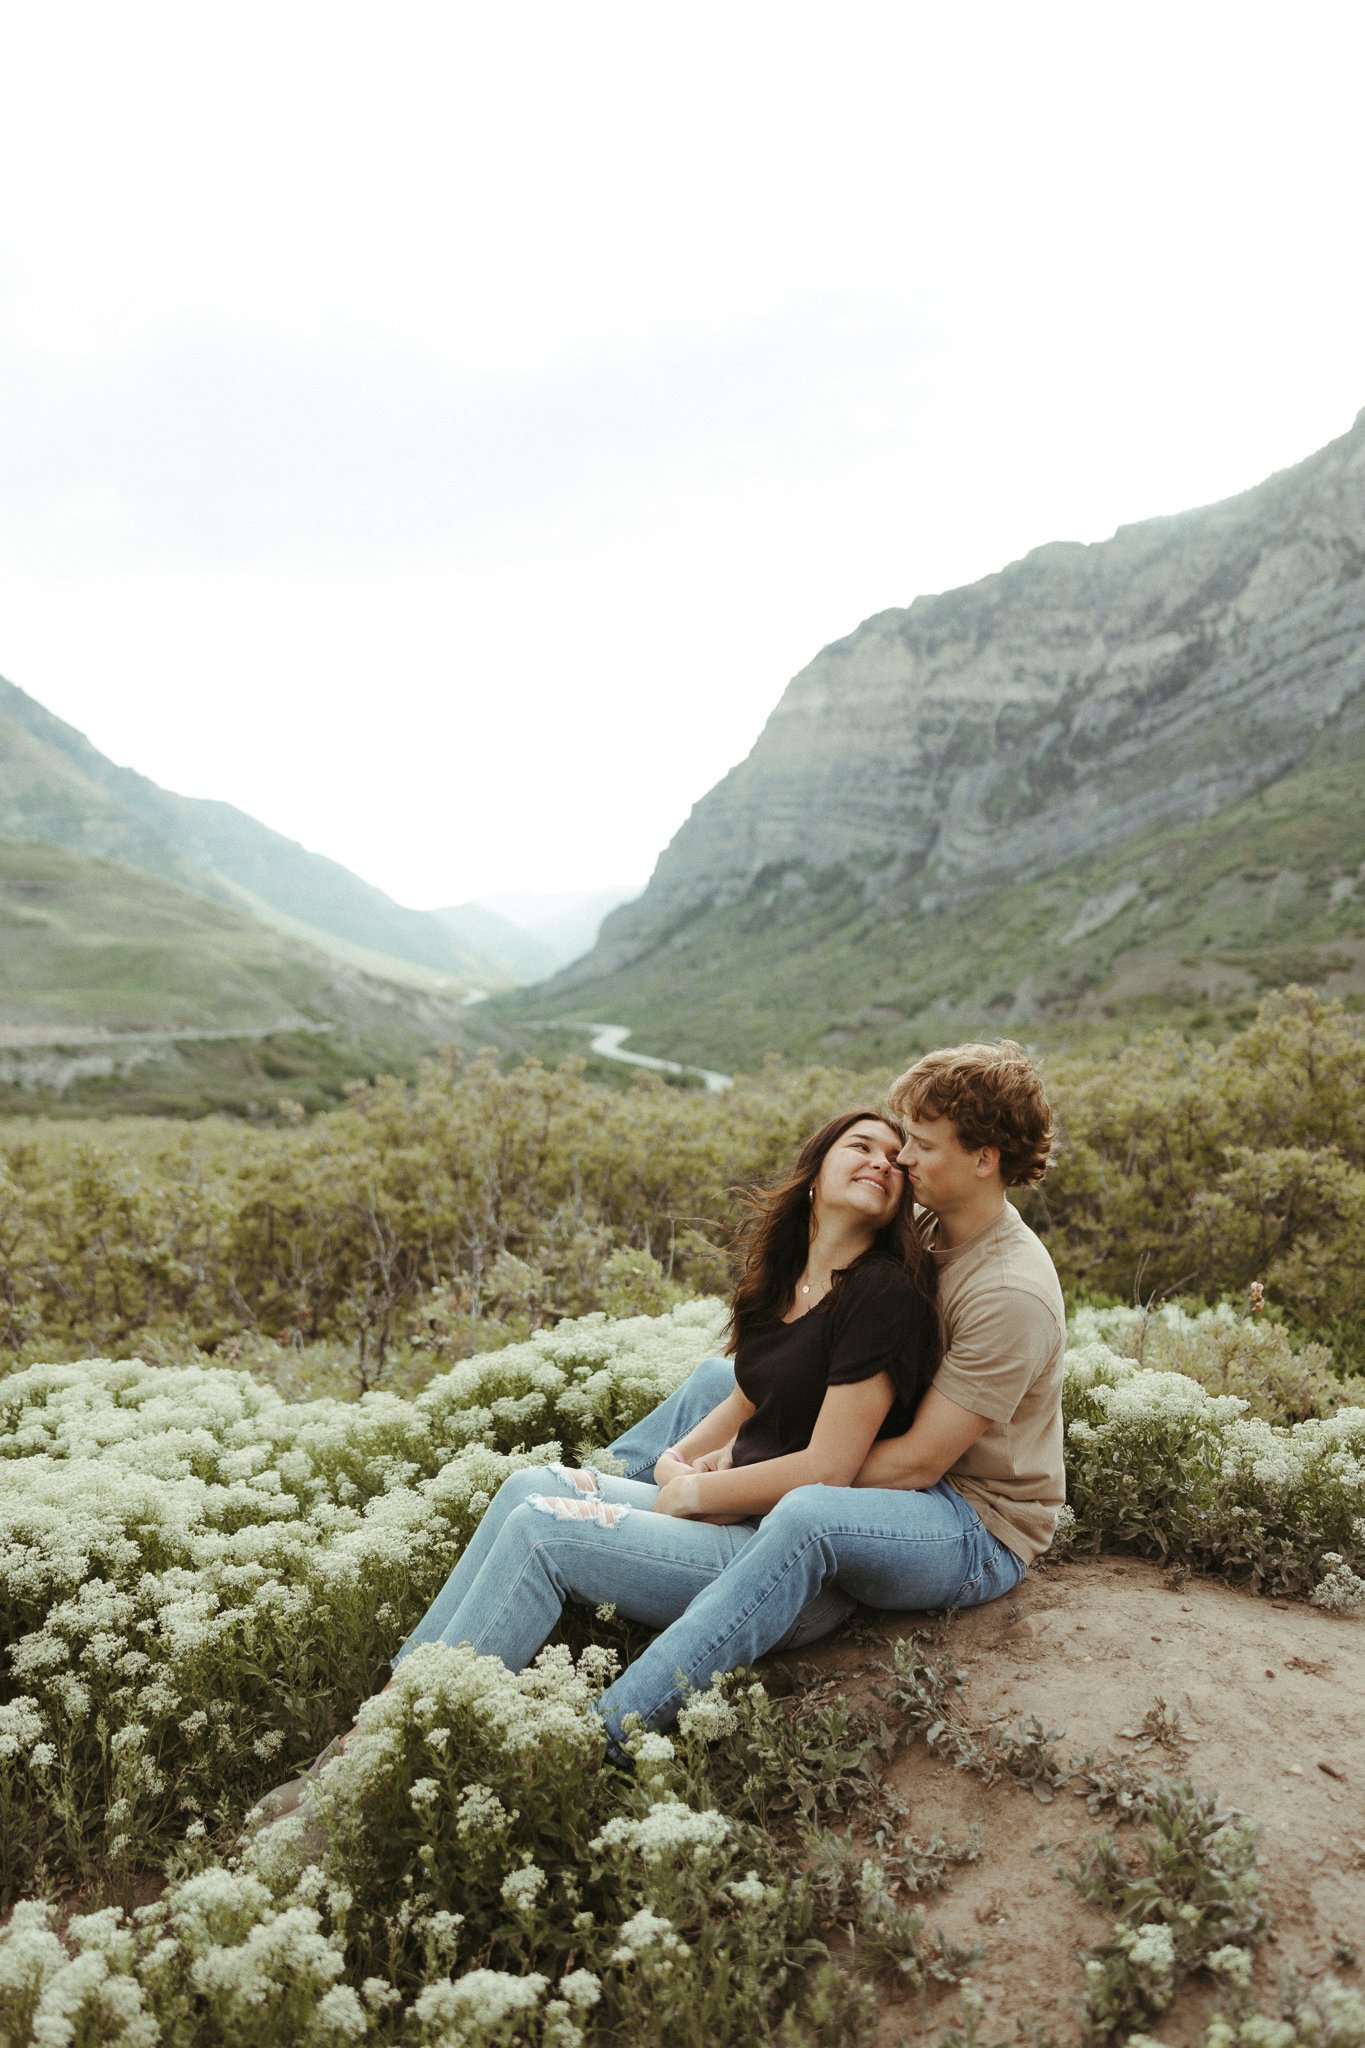 Spring-Provo-Canyon-Wildflowers-Engagement-Session-70